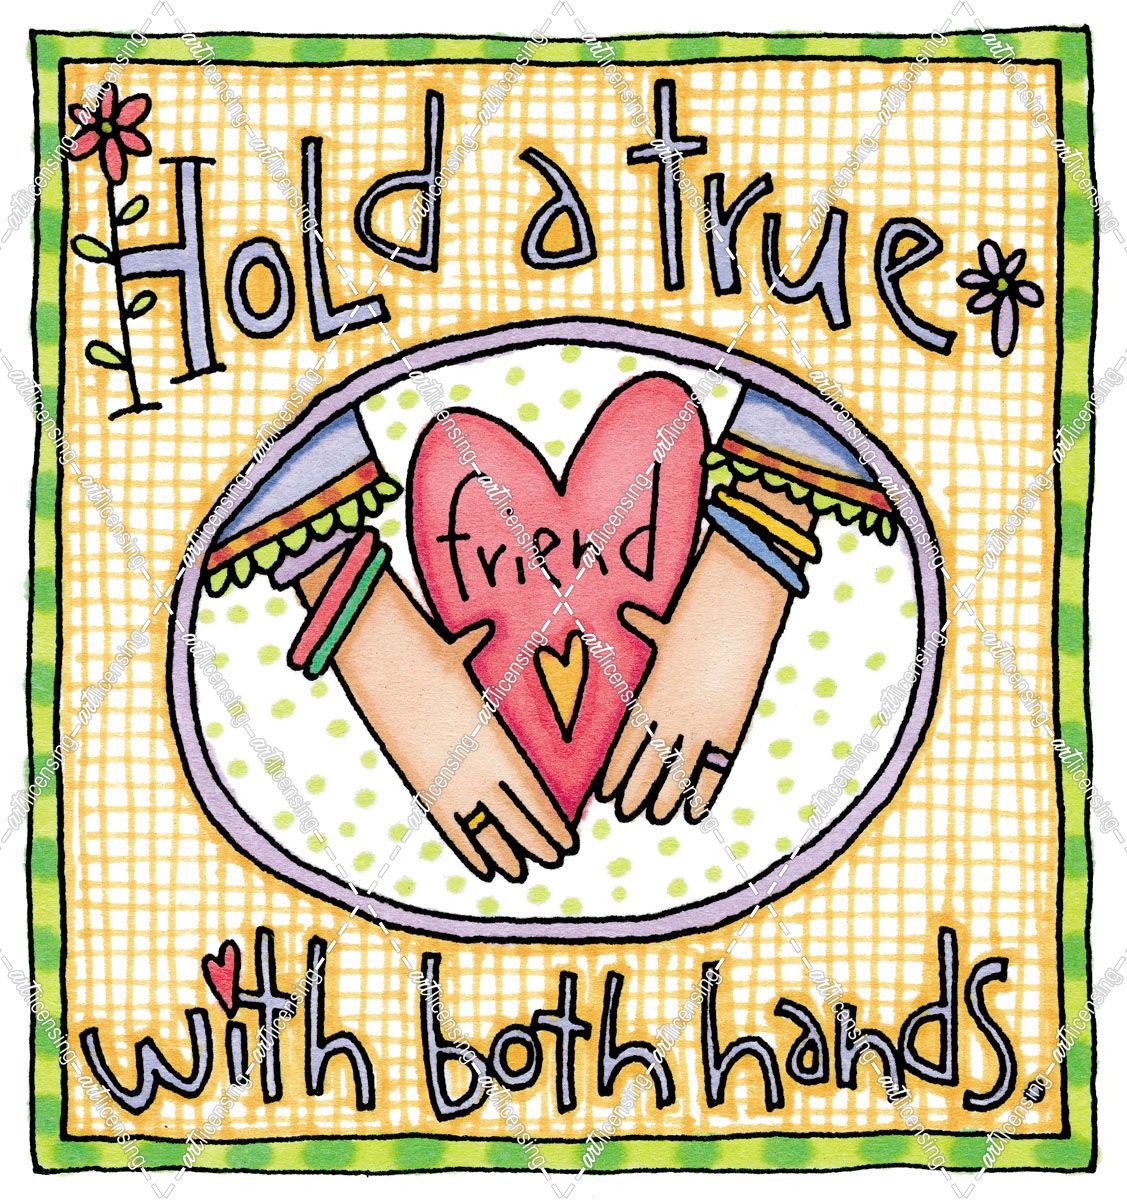 SD 21 – hold a true friend with both hands